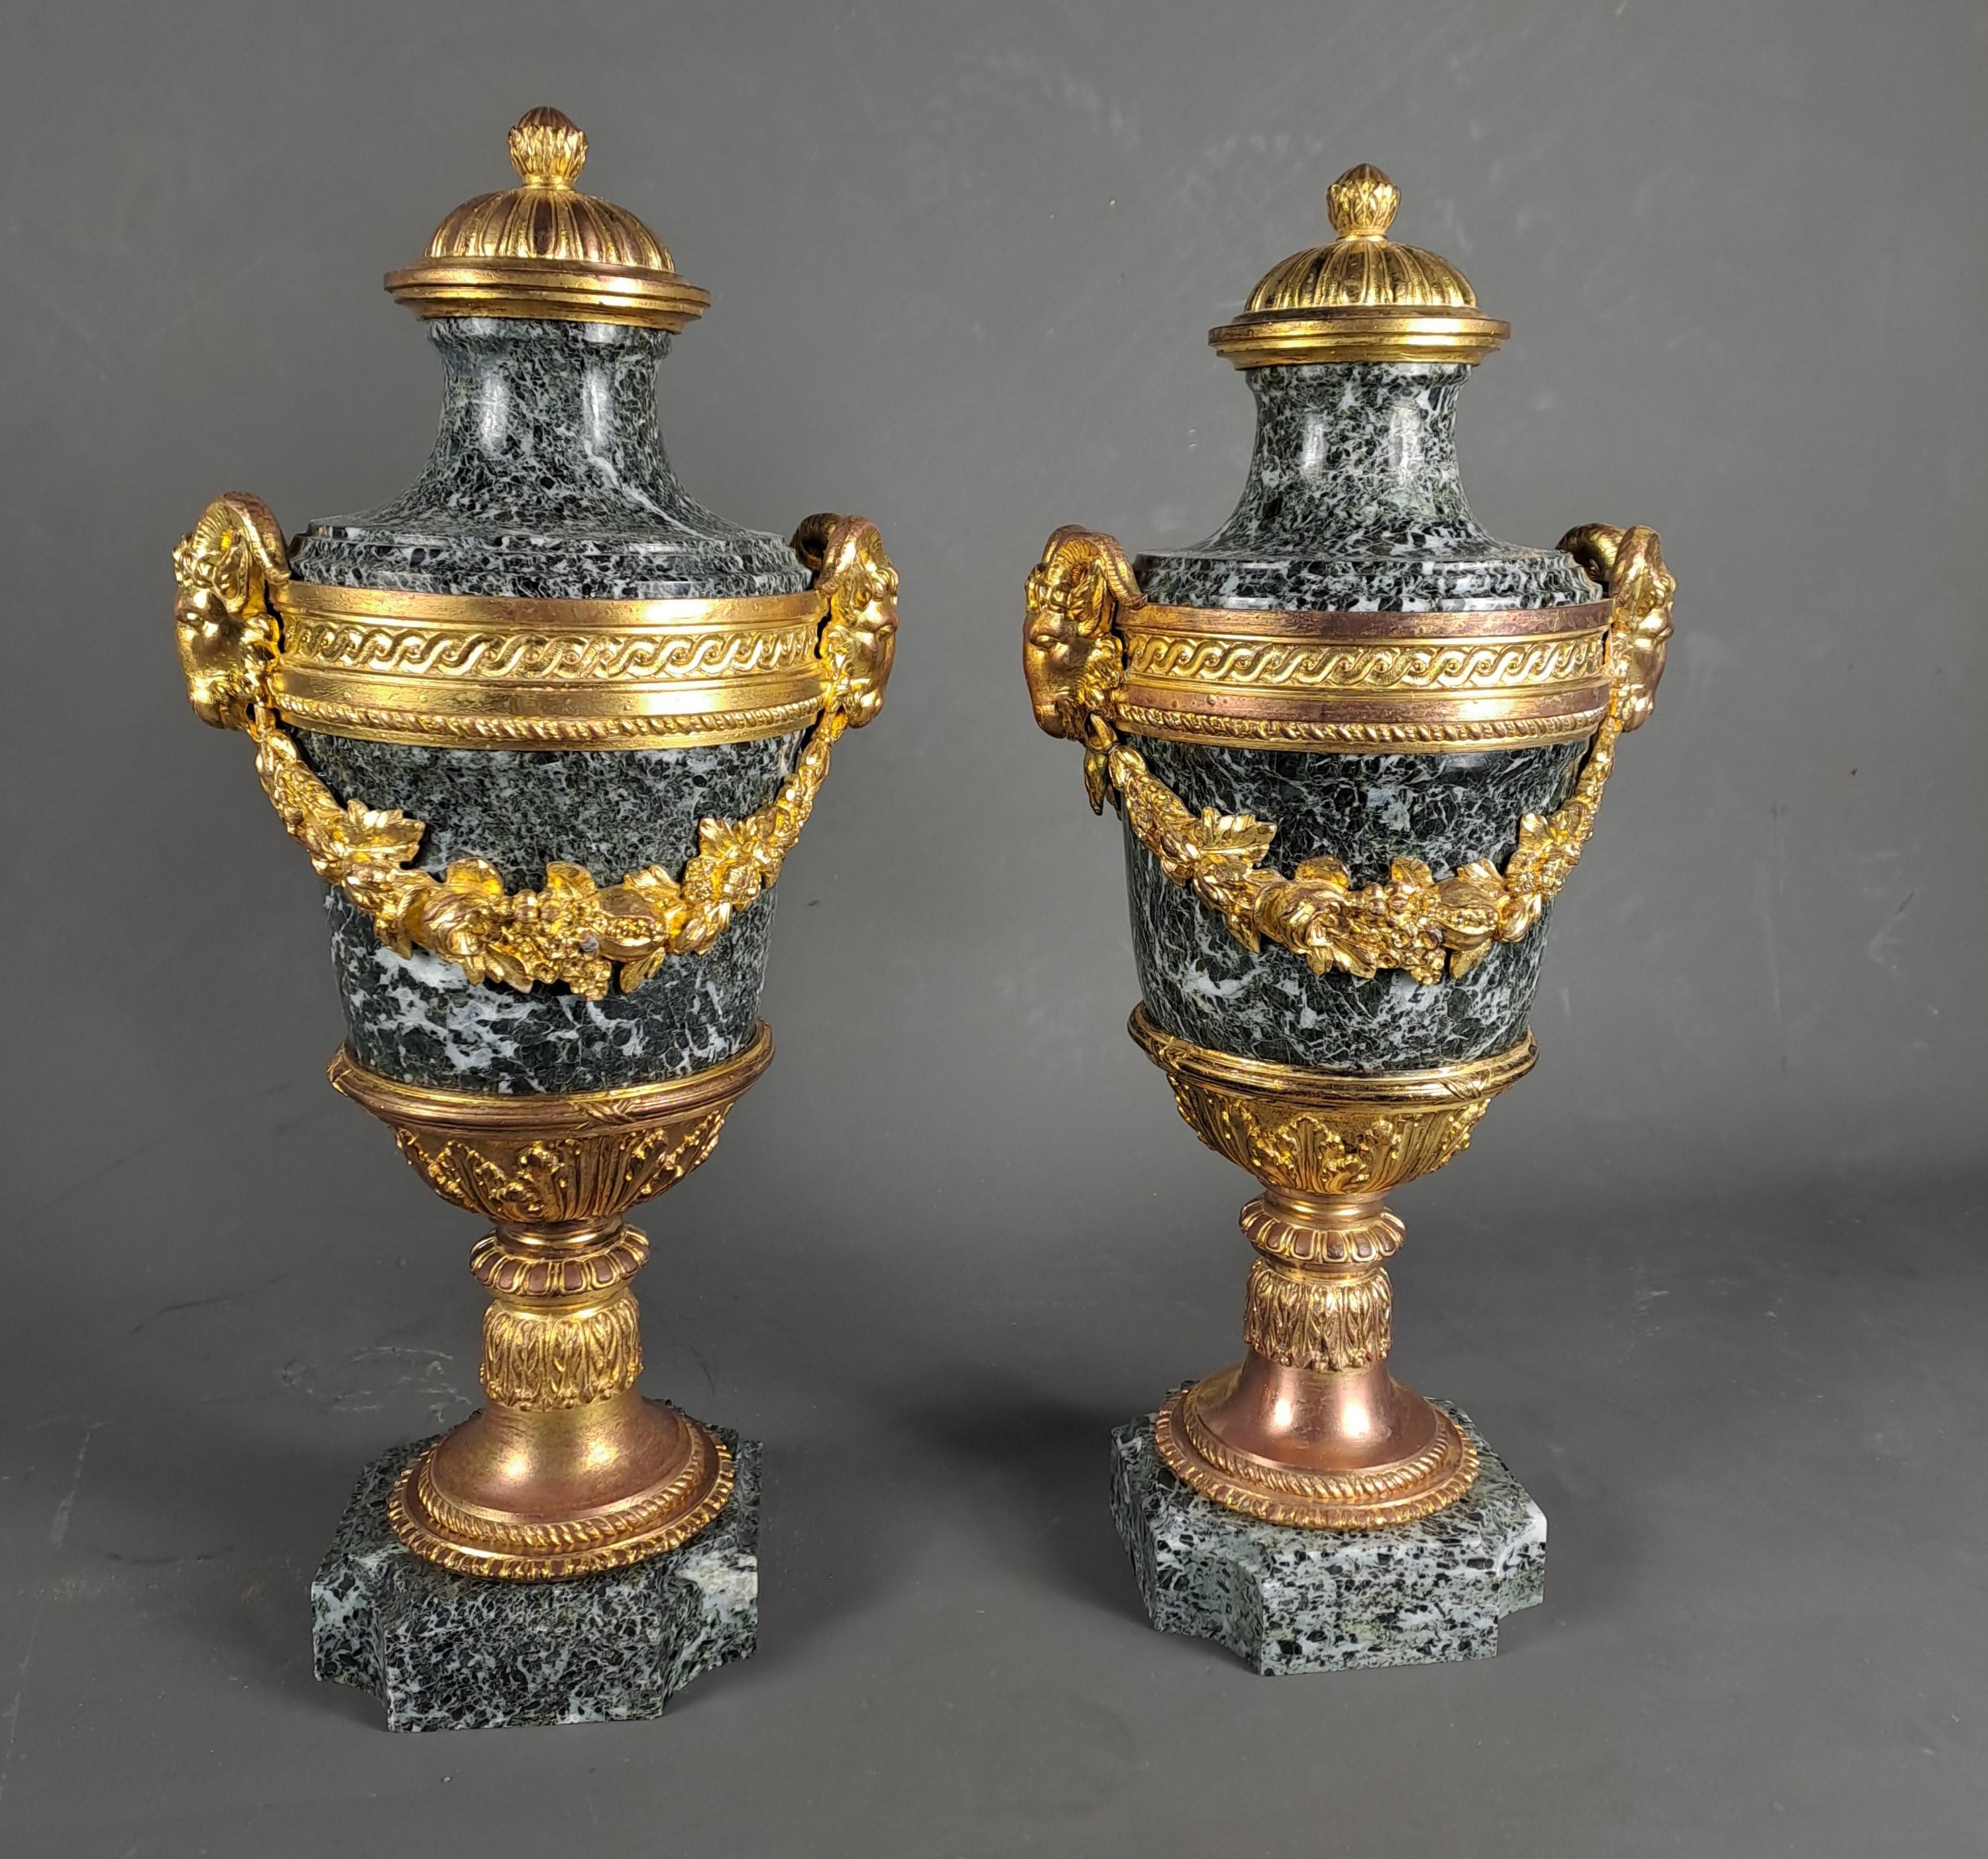 Pair of Louis XVI style cassolettes in sea green marble and beautiful gilded and chiseled bronze ornamentation decorated with rams' heads and floral garlands.

After a model by Henry Dasson

Good condition, some wear to the gilding